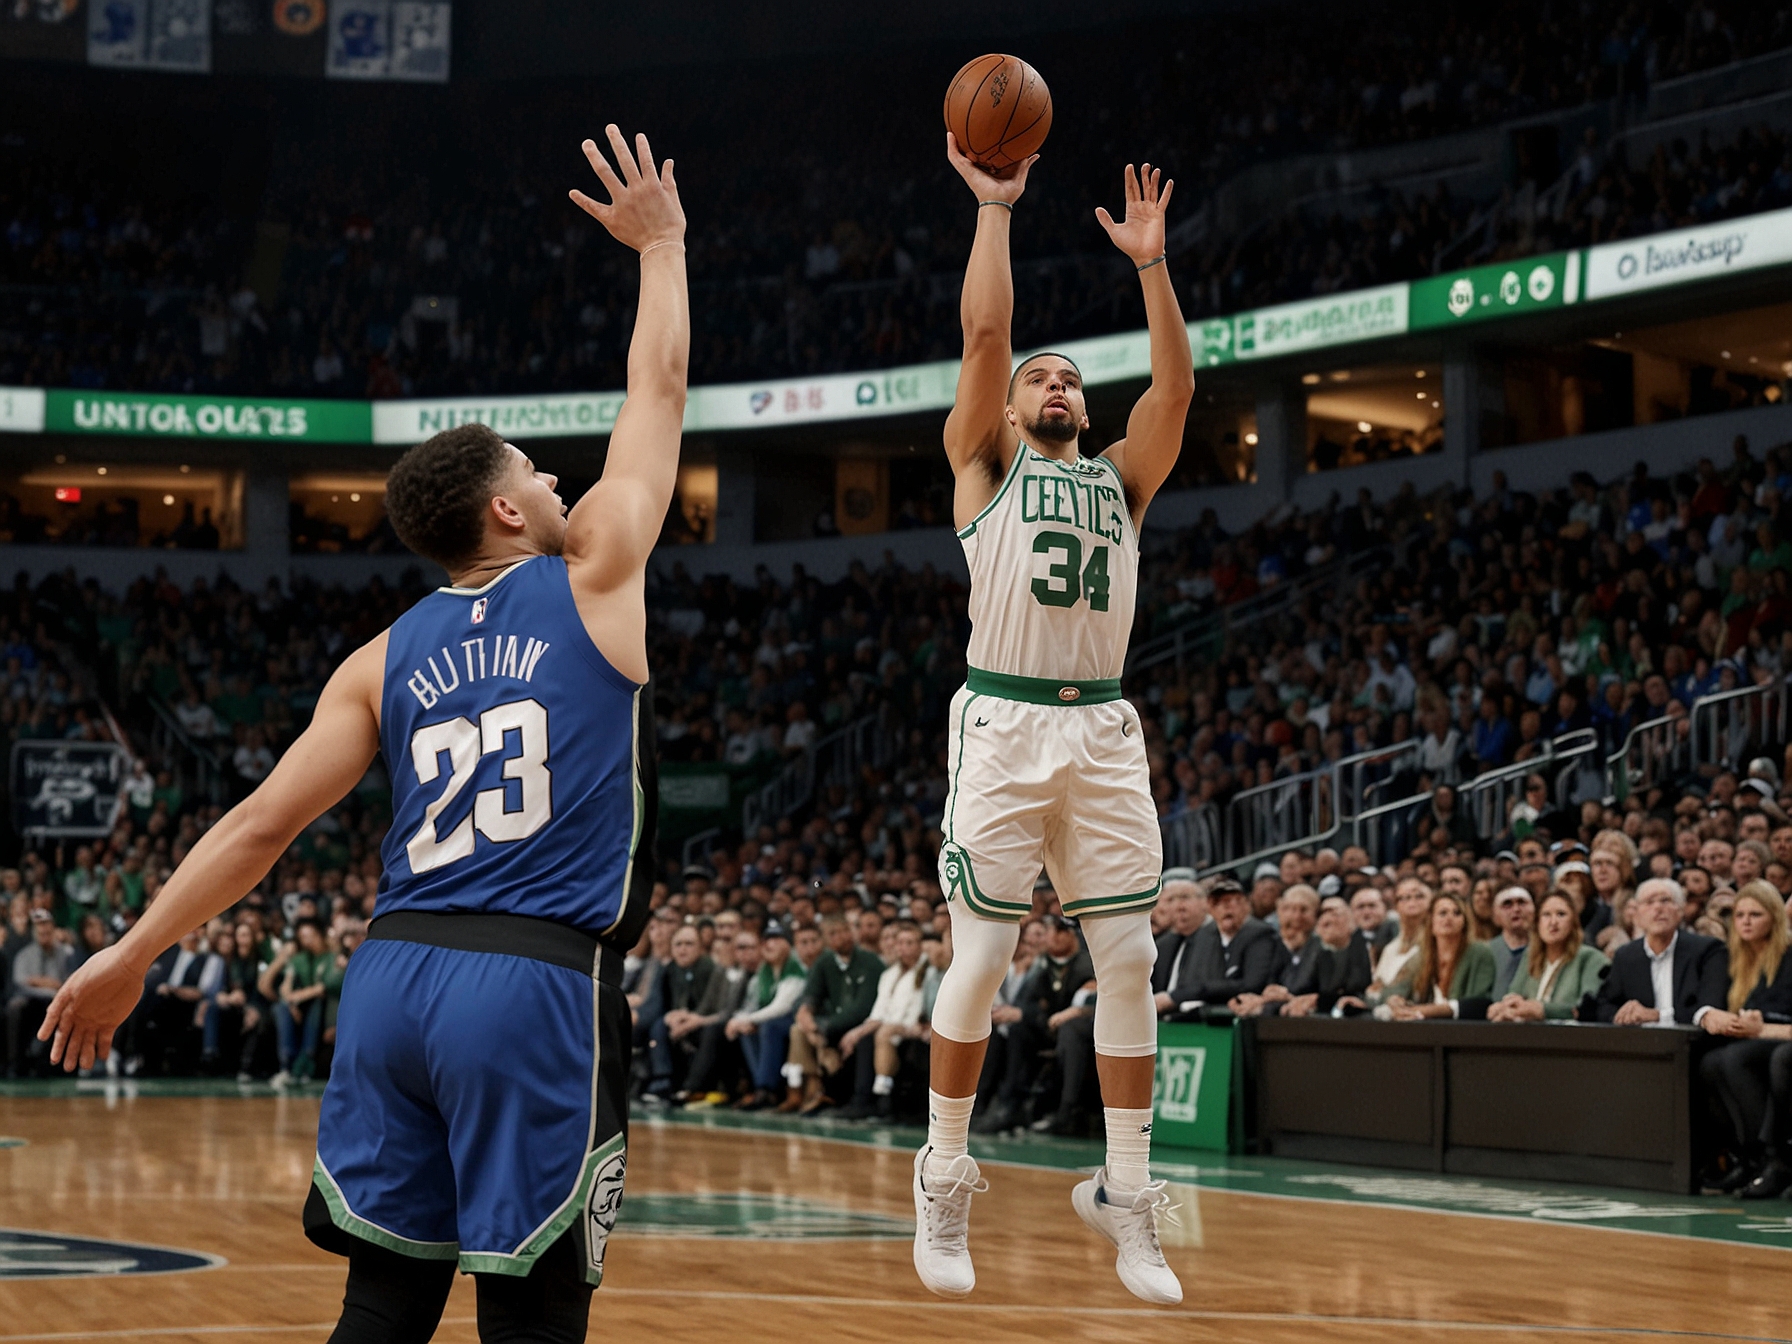 Jayson Tatum shoots a three-pointer over a Dallas Mavericks defender, showcasing Boston's dominant first-half performance in Game 5 of the NBA playoffs.